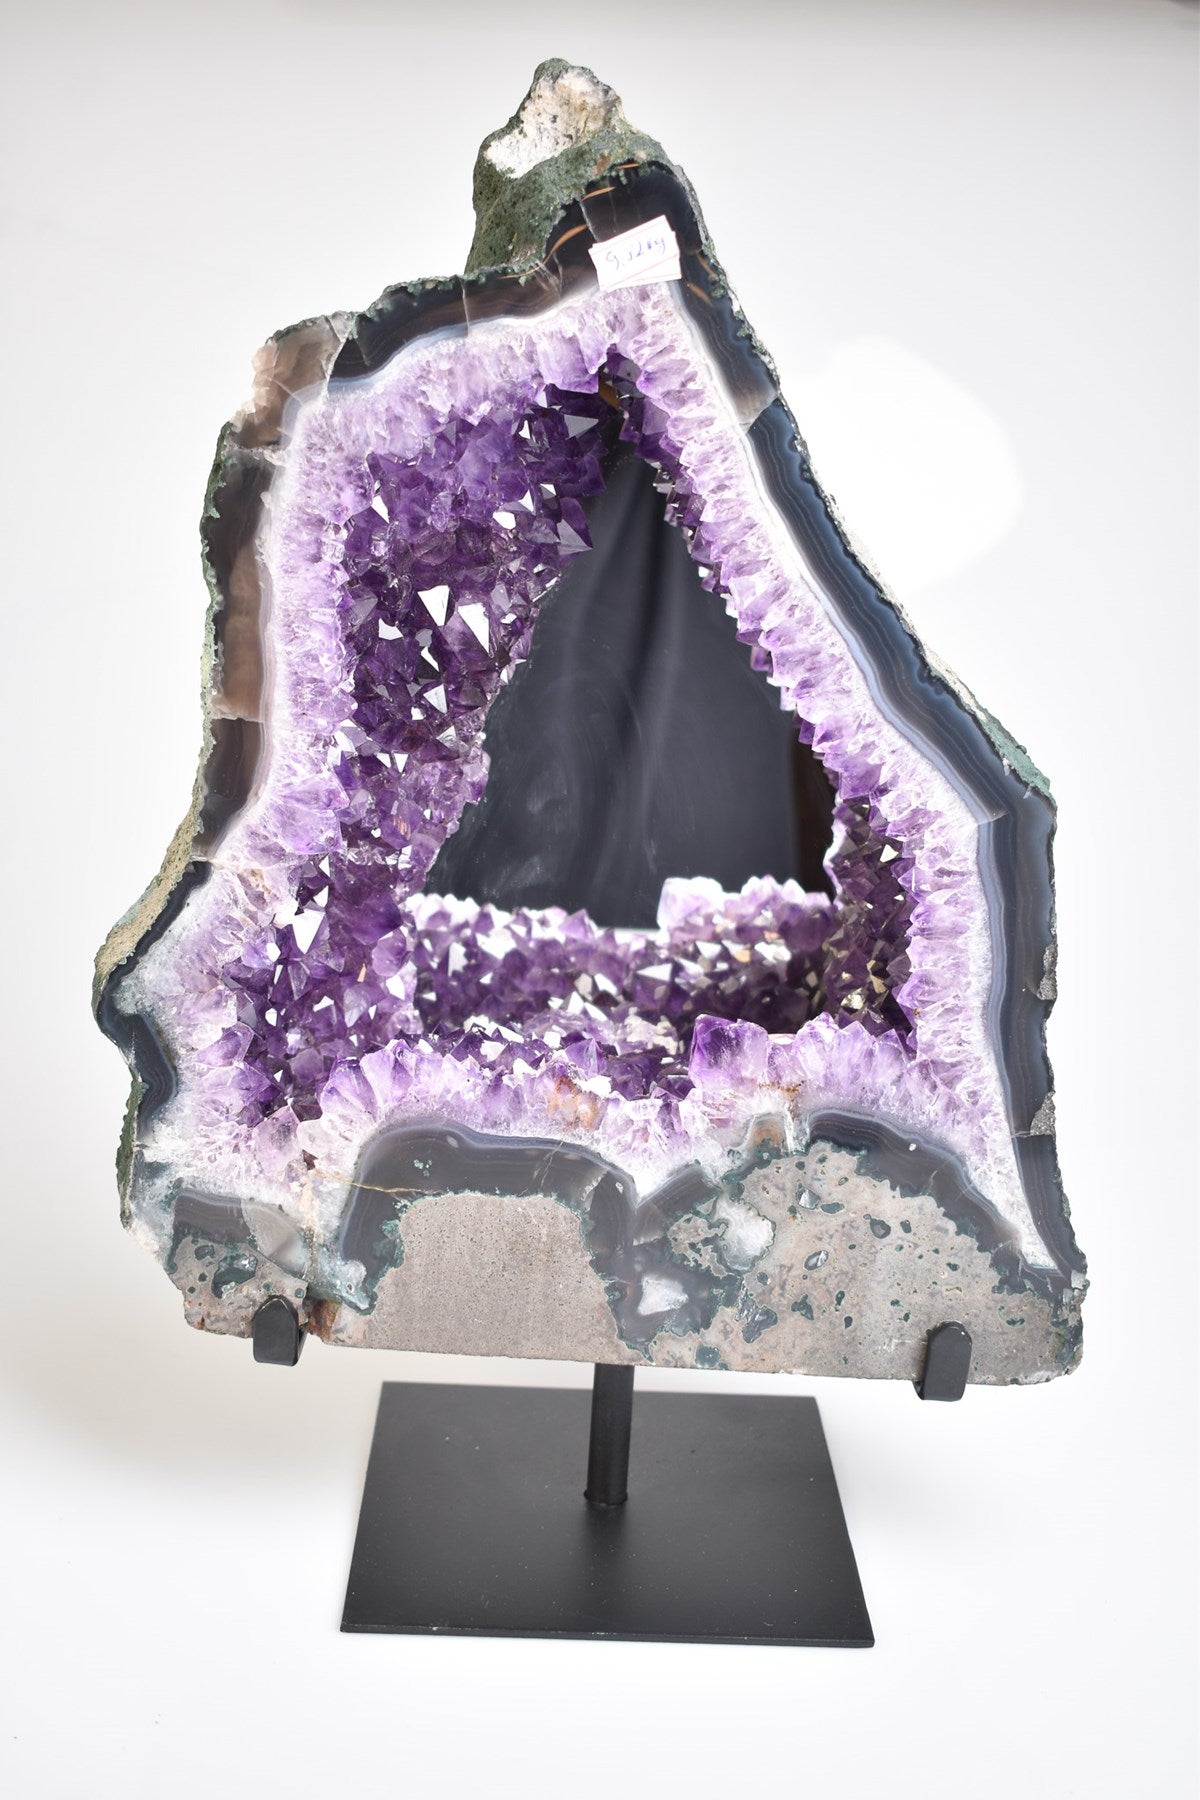 Large Brazilian Amethyst Geode with Mirror on Custom Stand